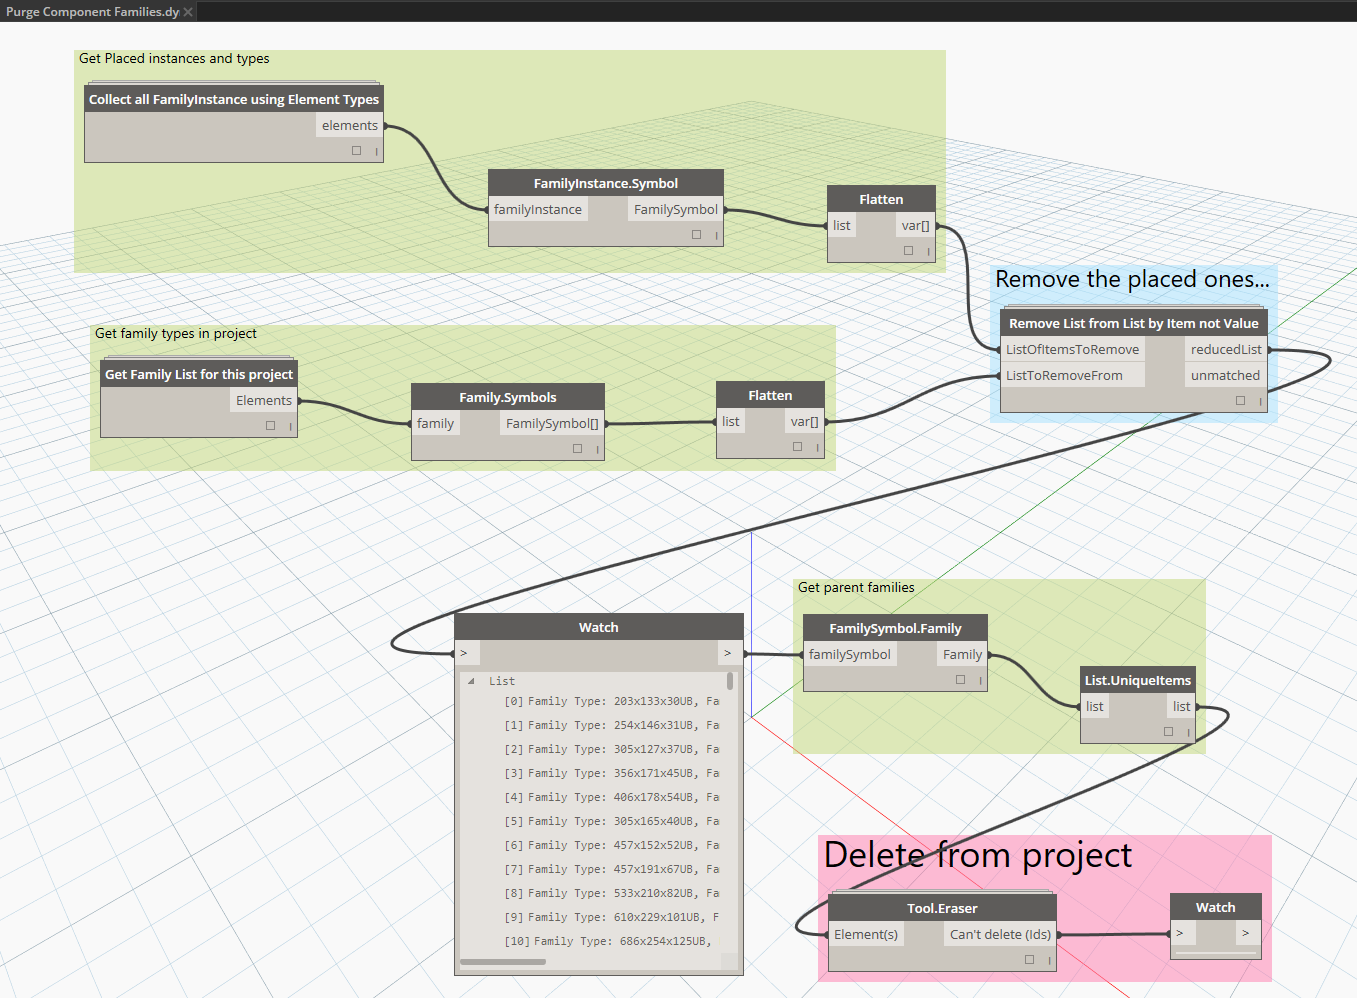 Purge Component Families using @DynamoBIM with Bakery and SteamNodes